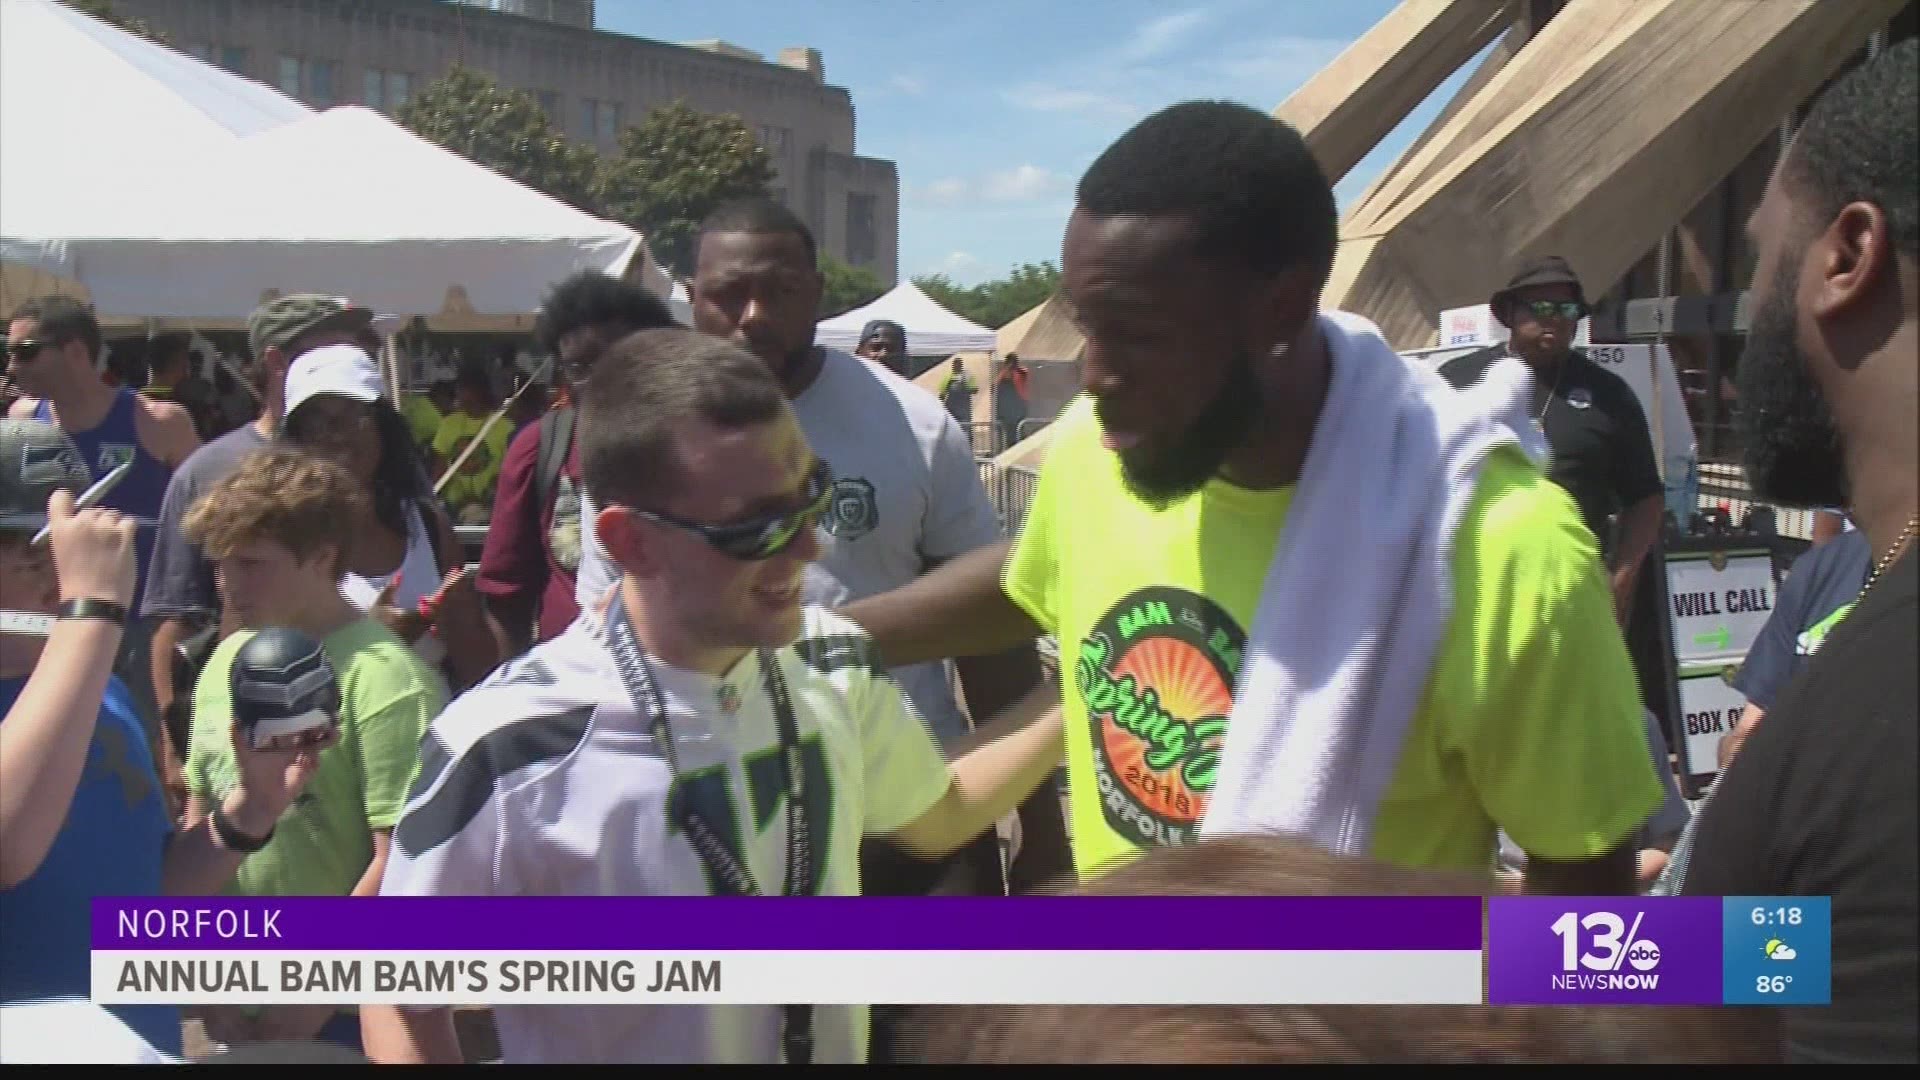 Norfolk native, Kam Chancellor holding his annual Bam Bam's Spring Jam. The Seahawks safety talked about giving back and his future in the NFL since suffering a neck injury.